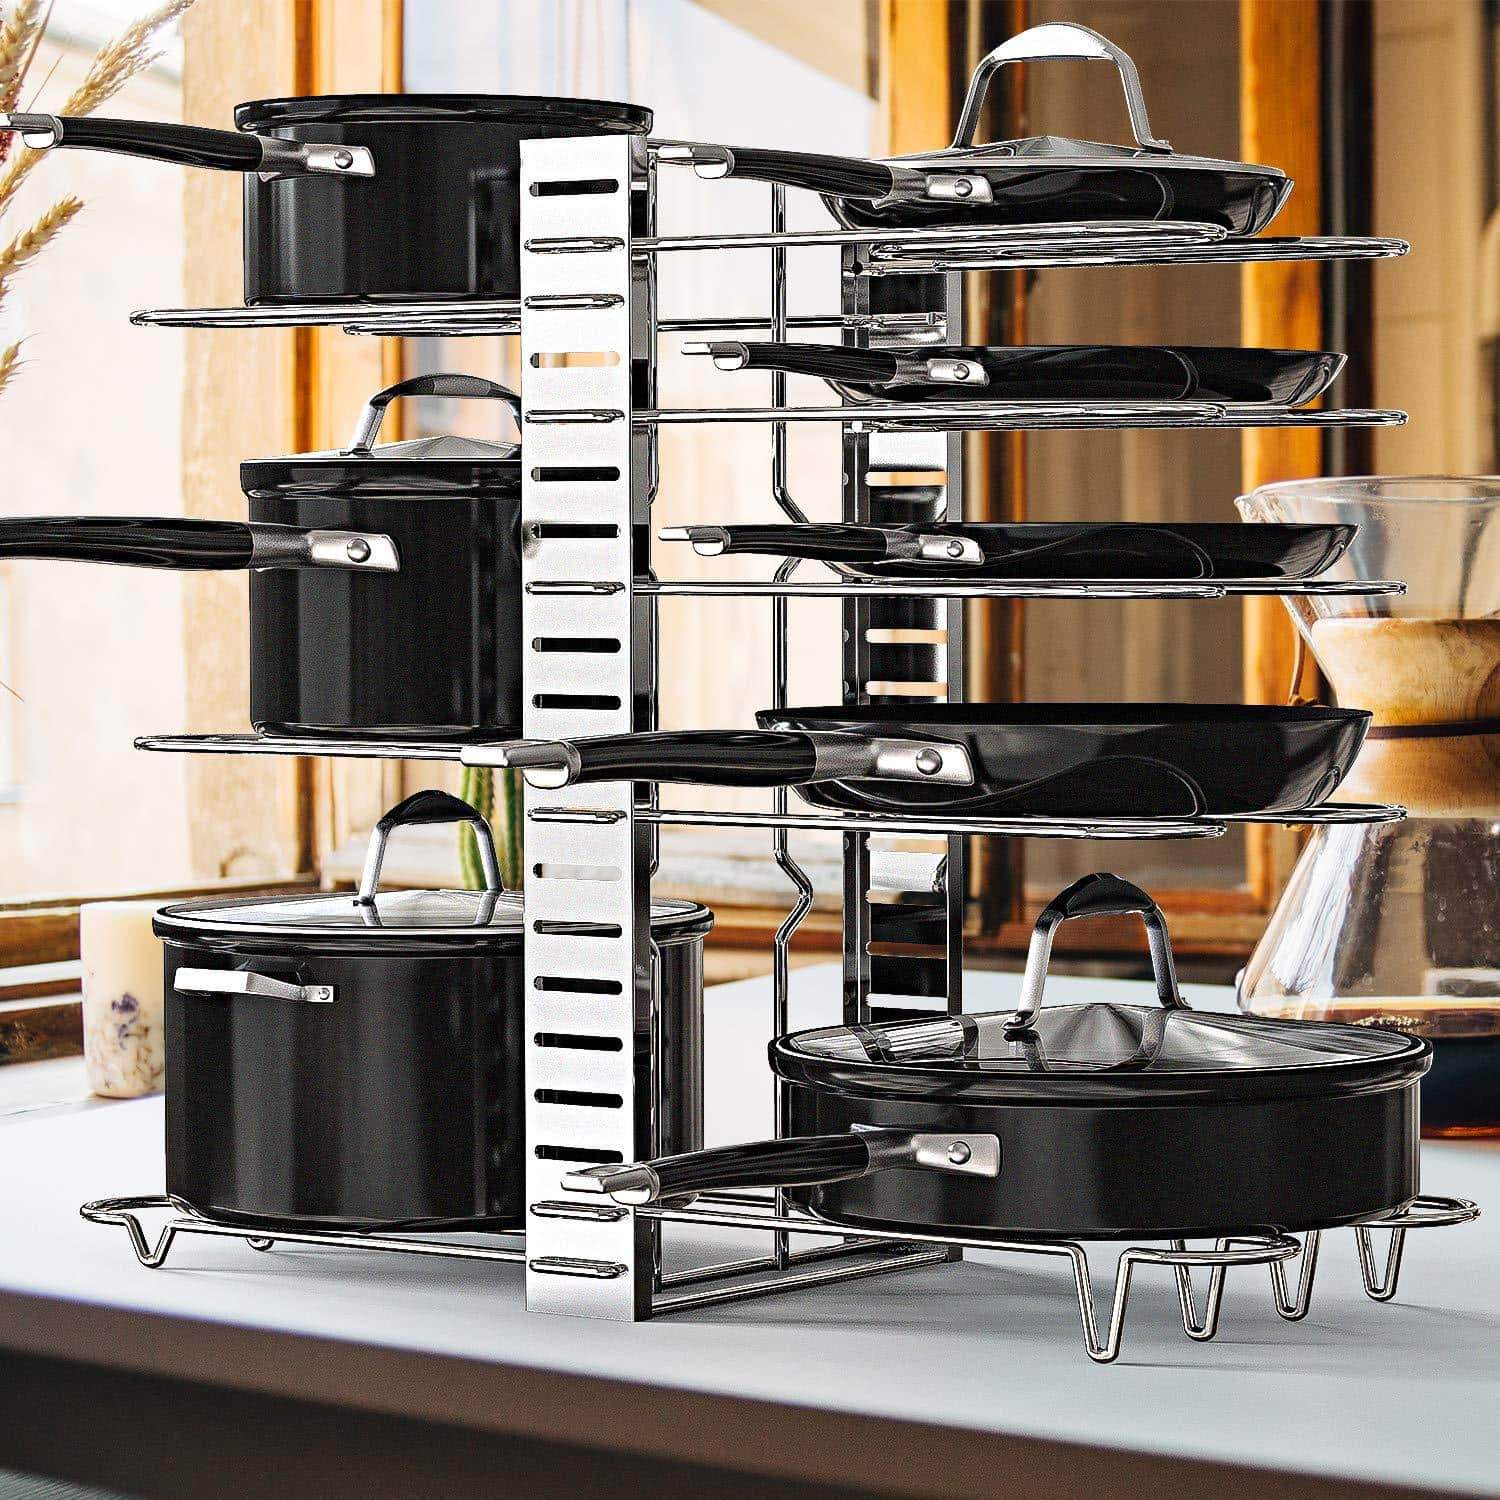 Explore geekdigg pot rack organizer adjustable height and position kitchen counter and cabinet pan organizer shelf rack pot lid holder with 3 diy methods silver